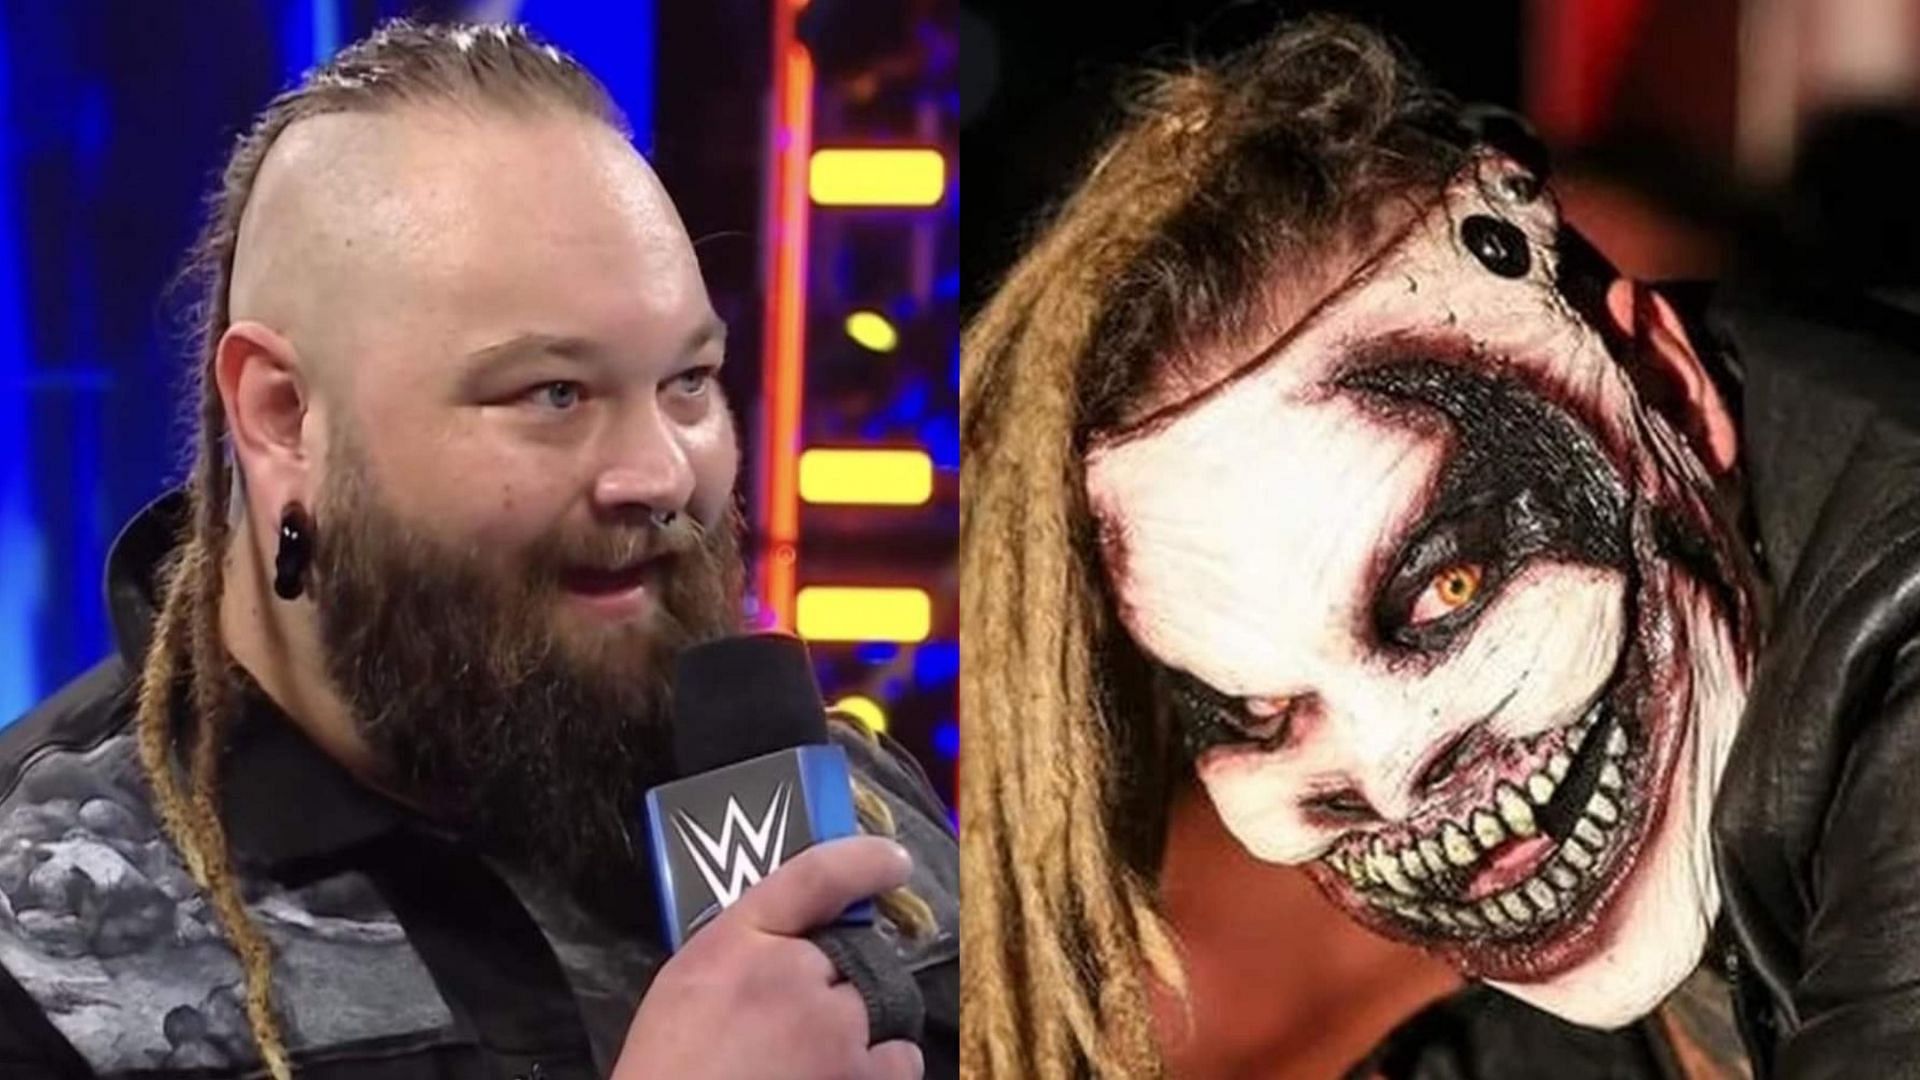 Bray Wyatt has only wrestled once since returning to WWE.